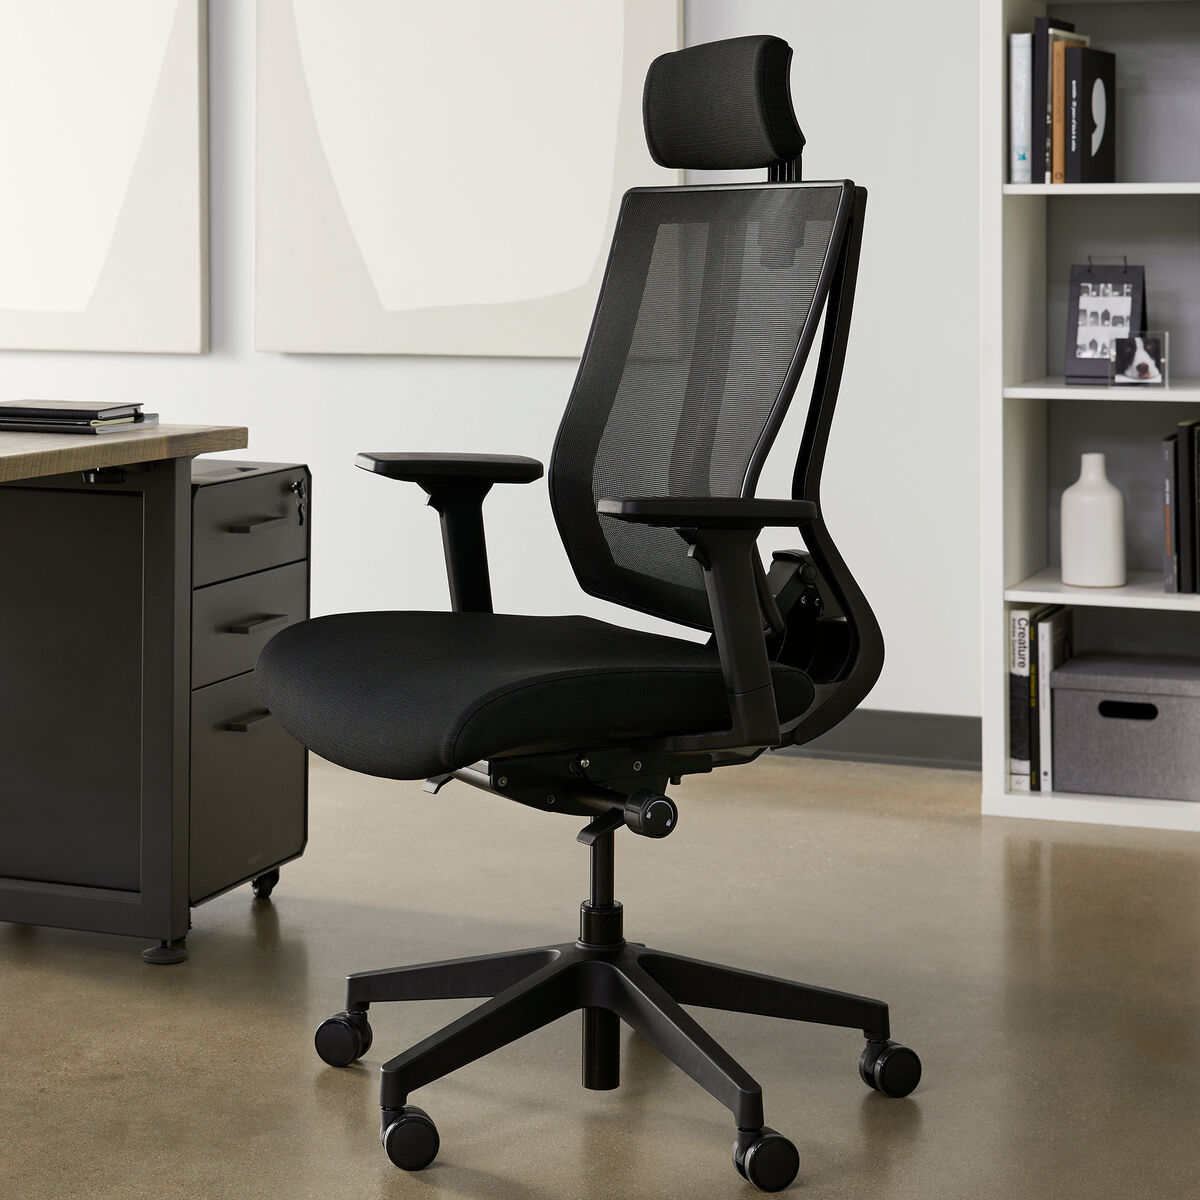 Working from home? Set up your ideal office space with these Vari products